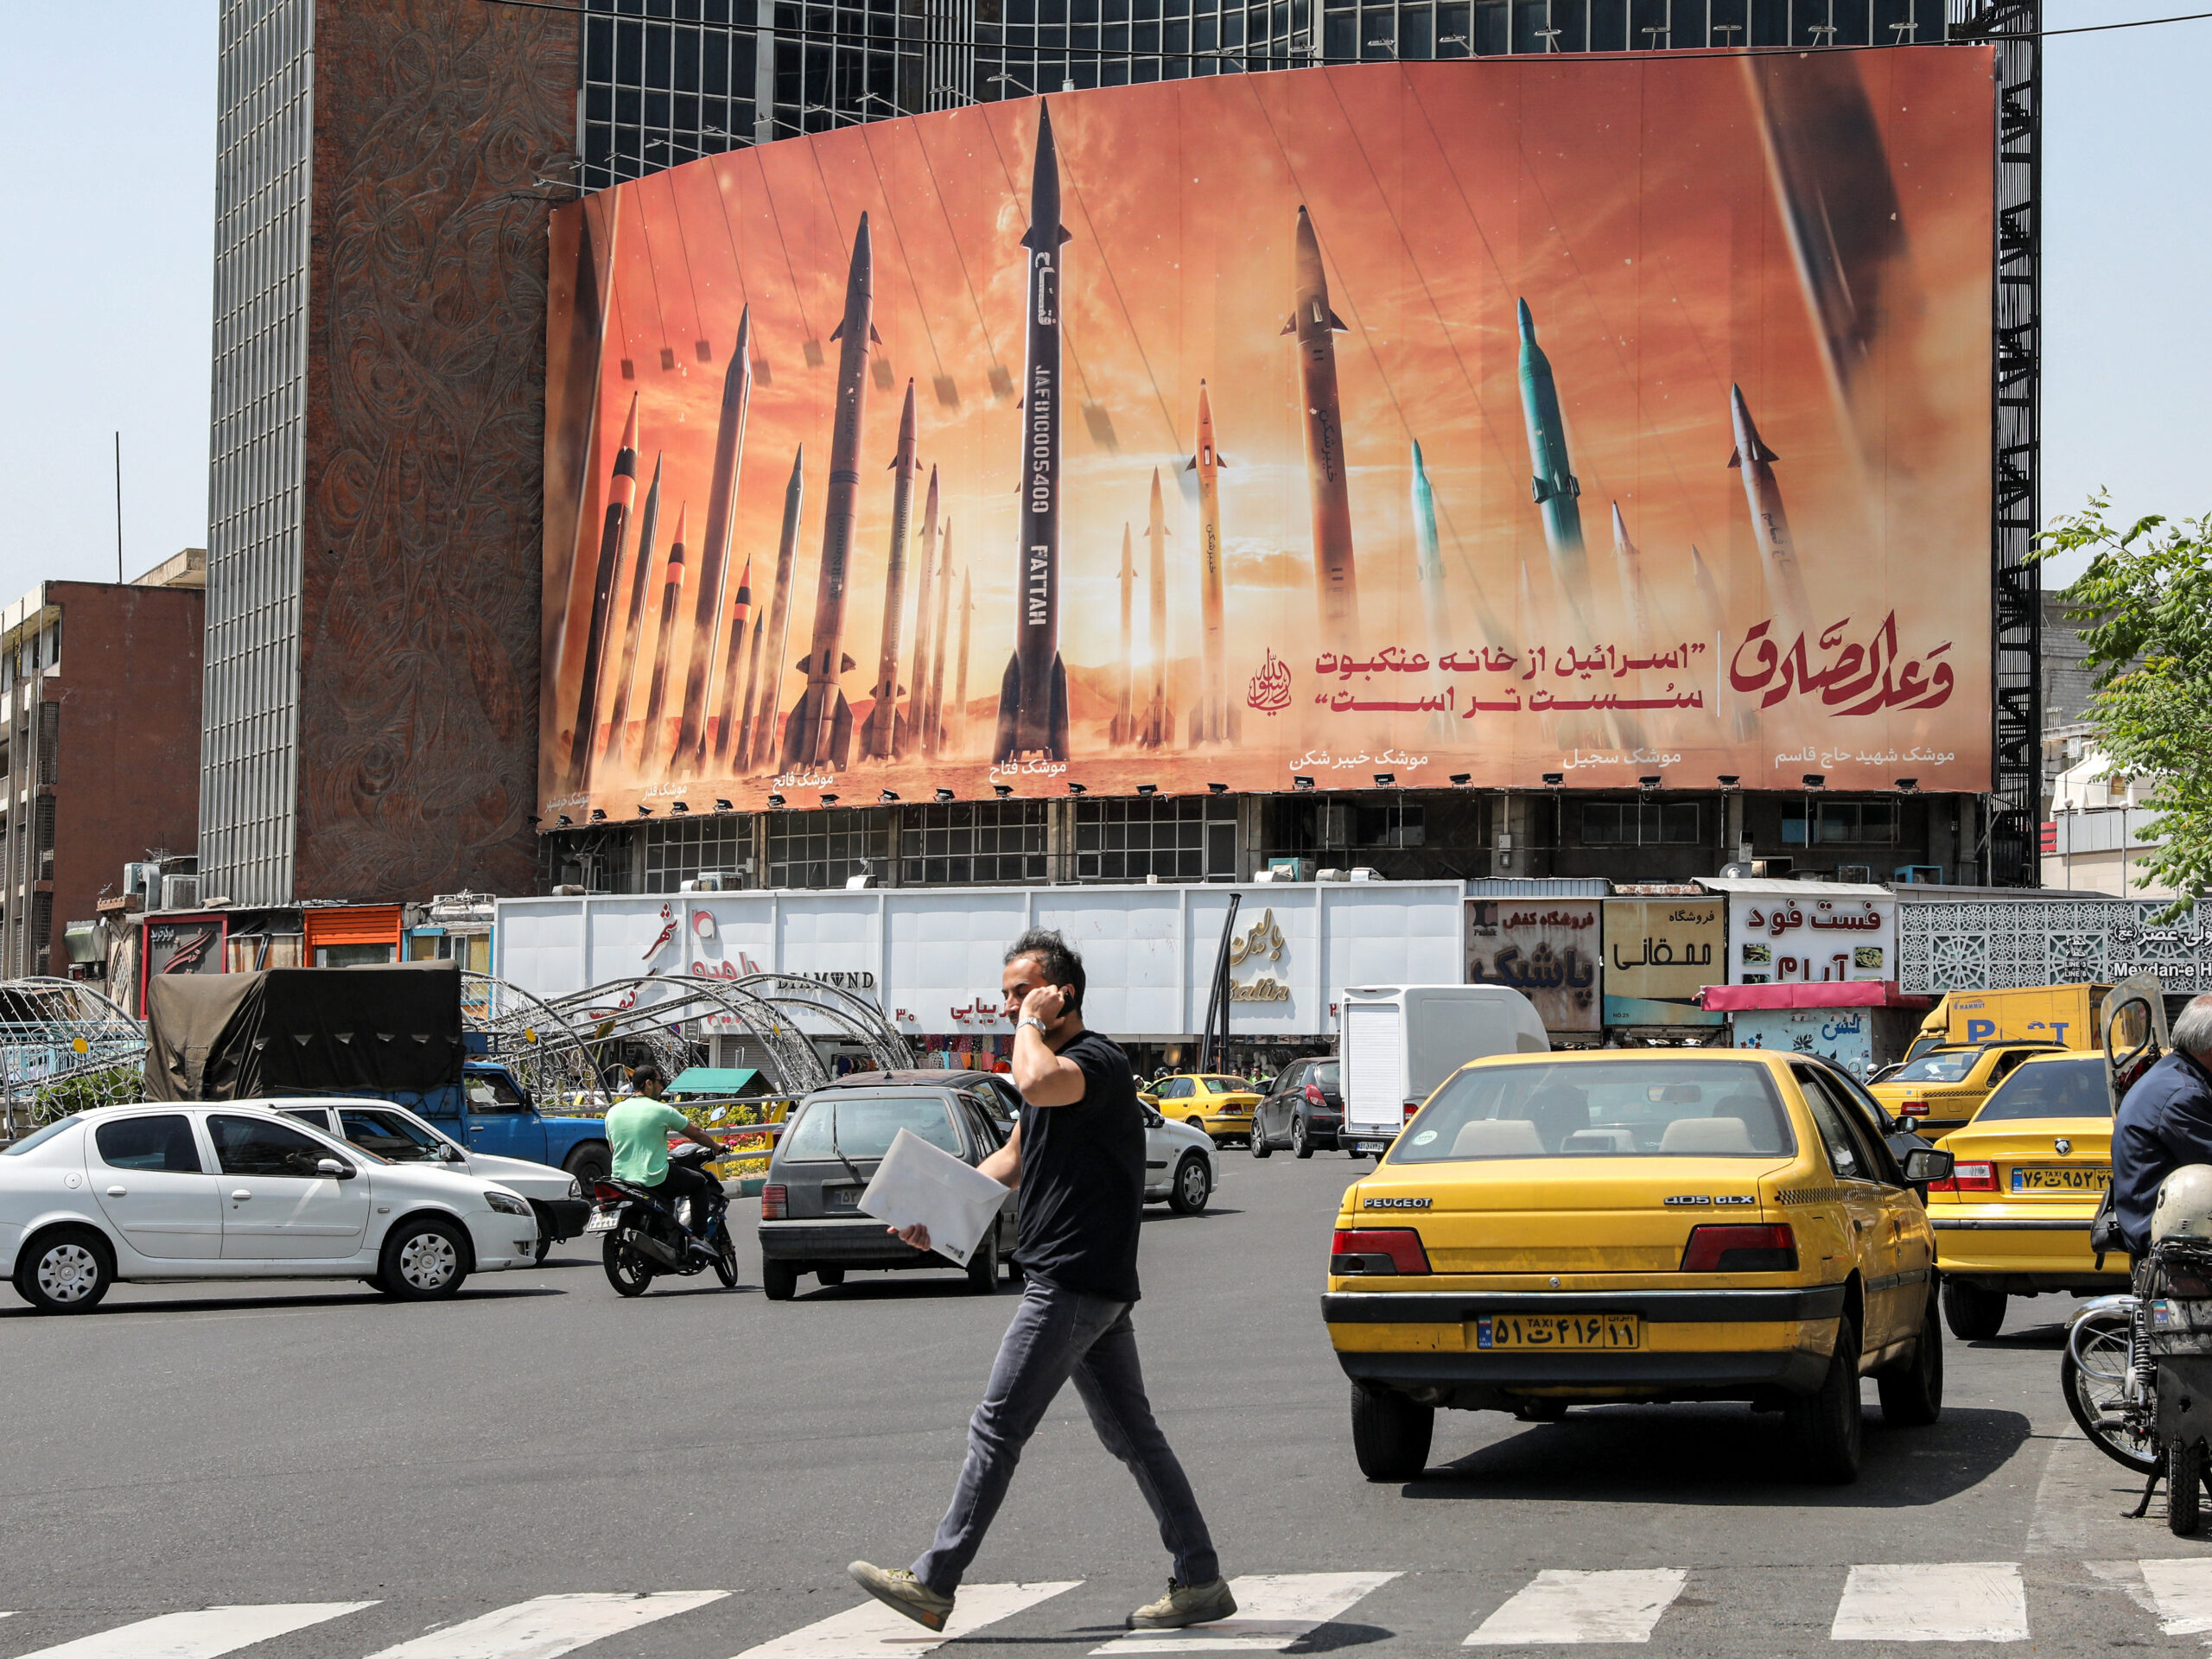 A billboard in central Tehran, Iran, depicts named Iranian ballistic missiles in service, with text in Arabic reading "the honest [person's] promise" and text in Persian reading "Israel is weaker than a spider's web," on April 15. Iran attacked Israel over the weekend with missiles, which it said was a response to a deadly strike on its consulate building in Damascus, Syria.